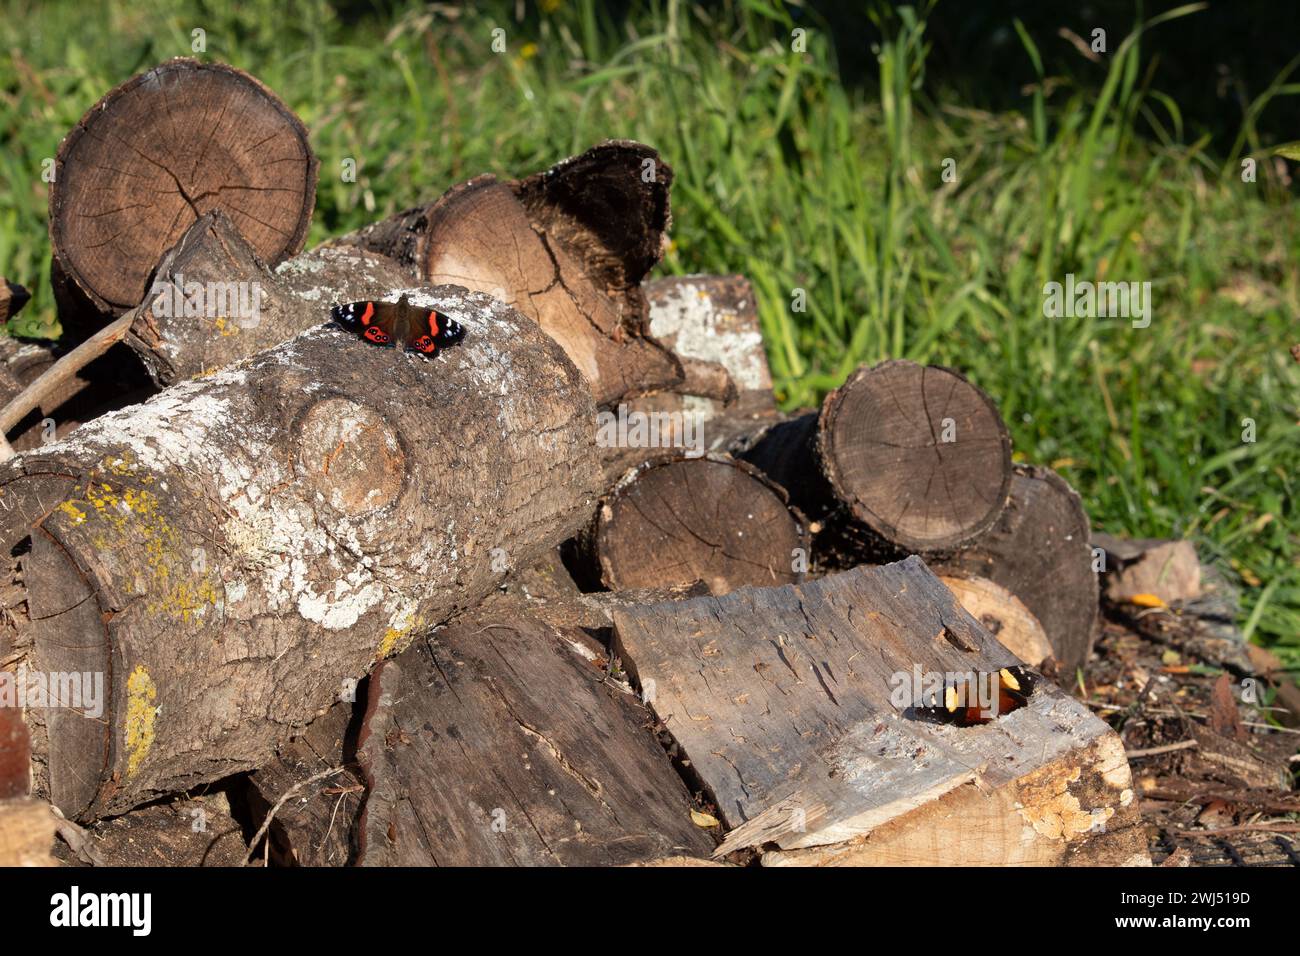 New Zealand red admiral butterfly and yellow admiral butterfly basking on logs outside. Stock Photo